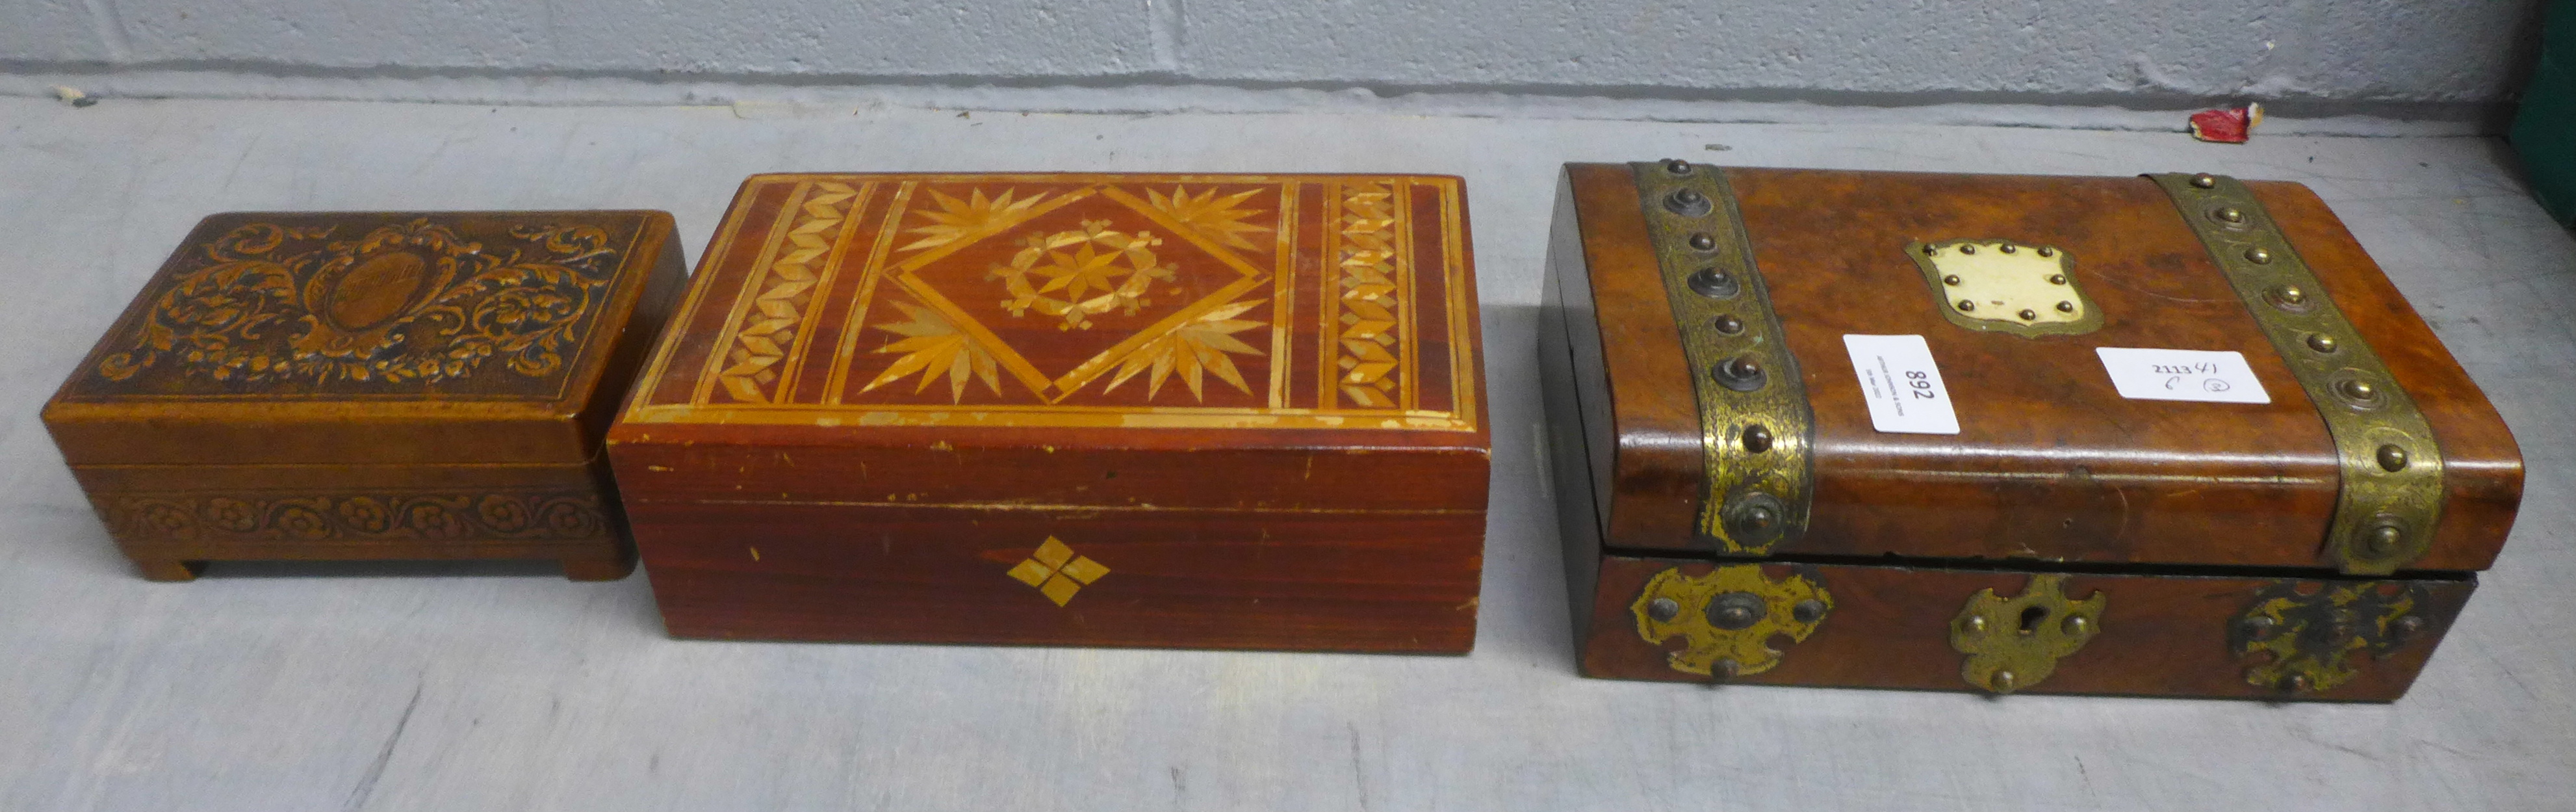 Three wooden jewellery boxes